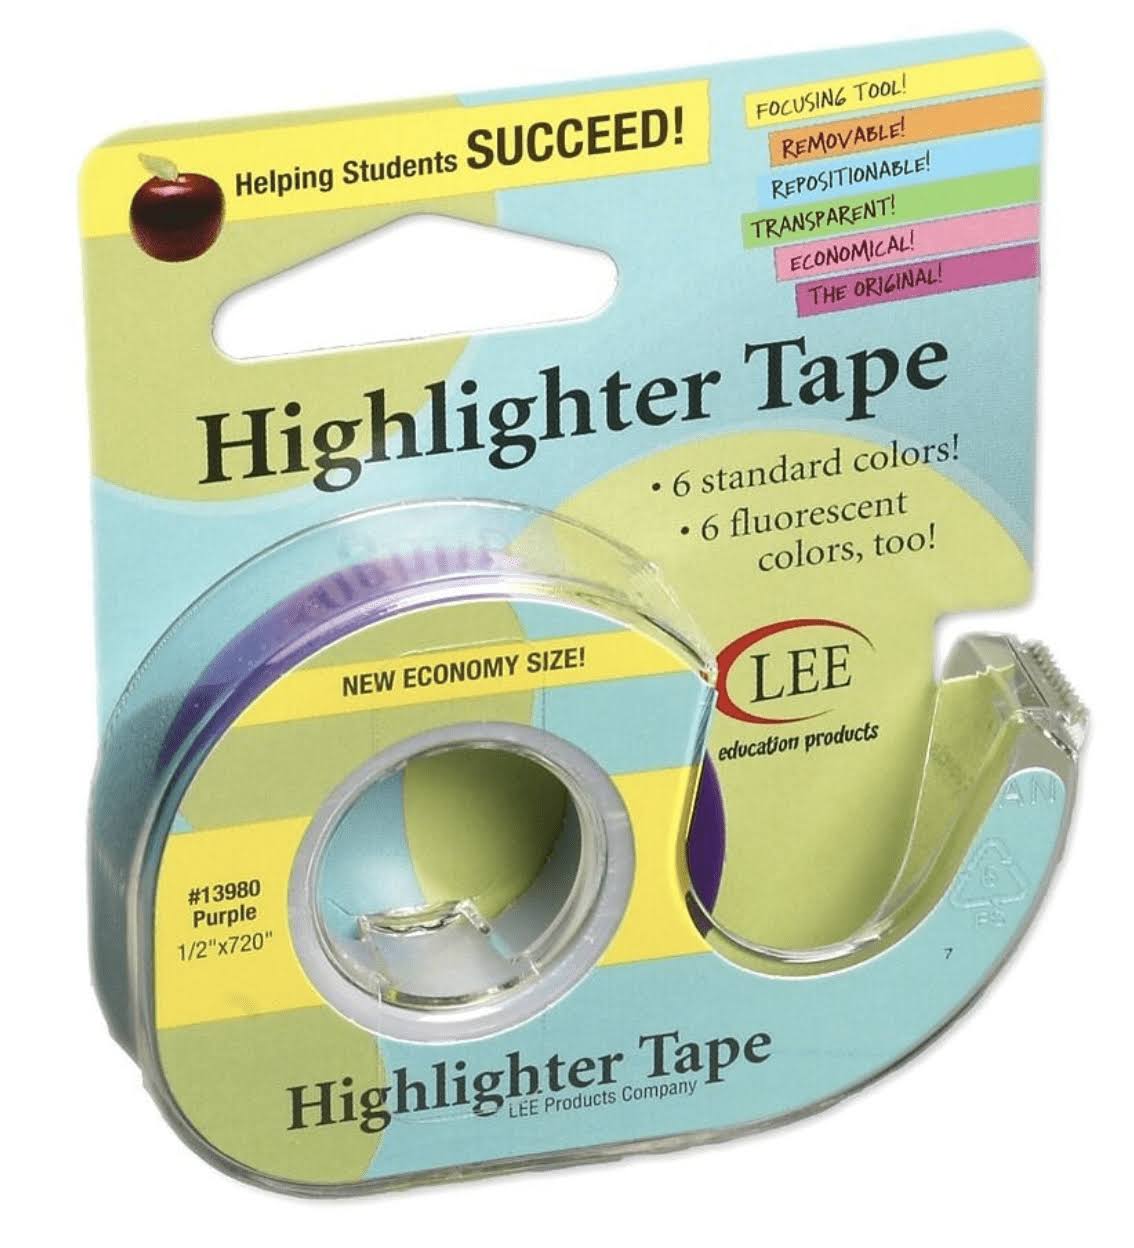 Lee Products Highlighter Tape - Blue, 1.3cm x 1000cm